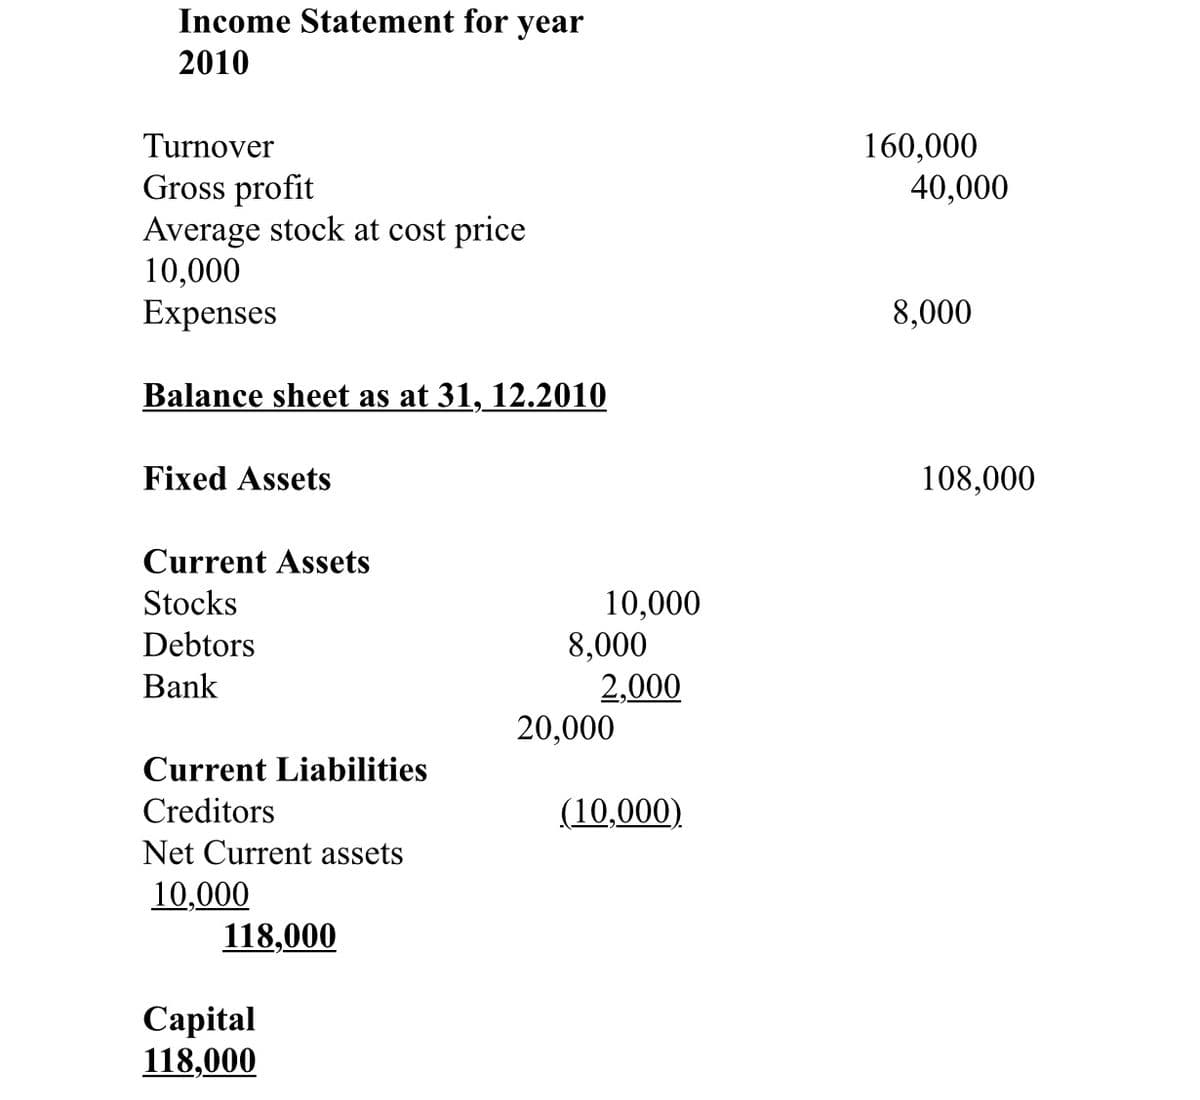 Income Statement for year
2010
Turnover
160,000
40,000
Gross profit
Average stock at cost price
10,000
Expenses
8,000
Balance sheet as at 31, 12.2010
Fixed Assets
108,000
Current Assets
Stocks
10,000
8,000
2,000
20,000
Debtors
Bank
Current Liabilities
Creditors
(10,000)
Net Current assets
10,000
118,000
Сapital
118,000
